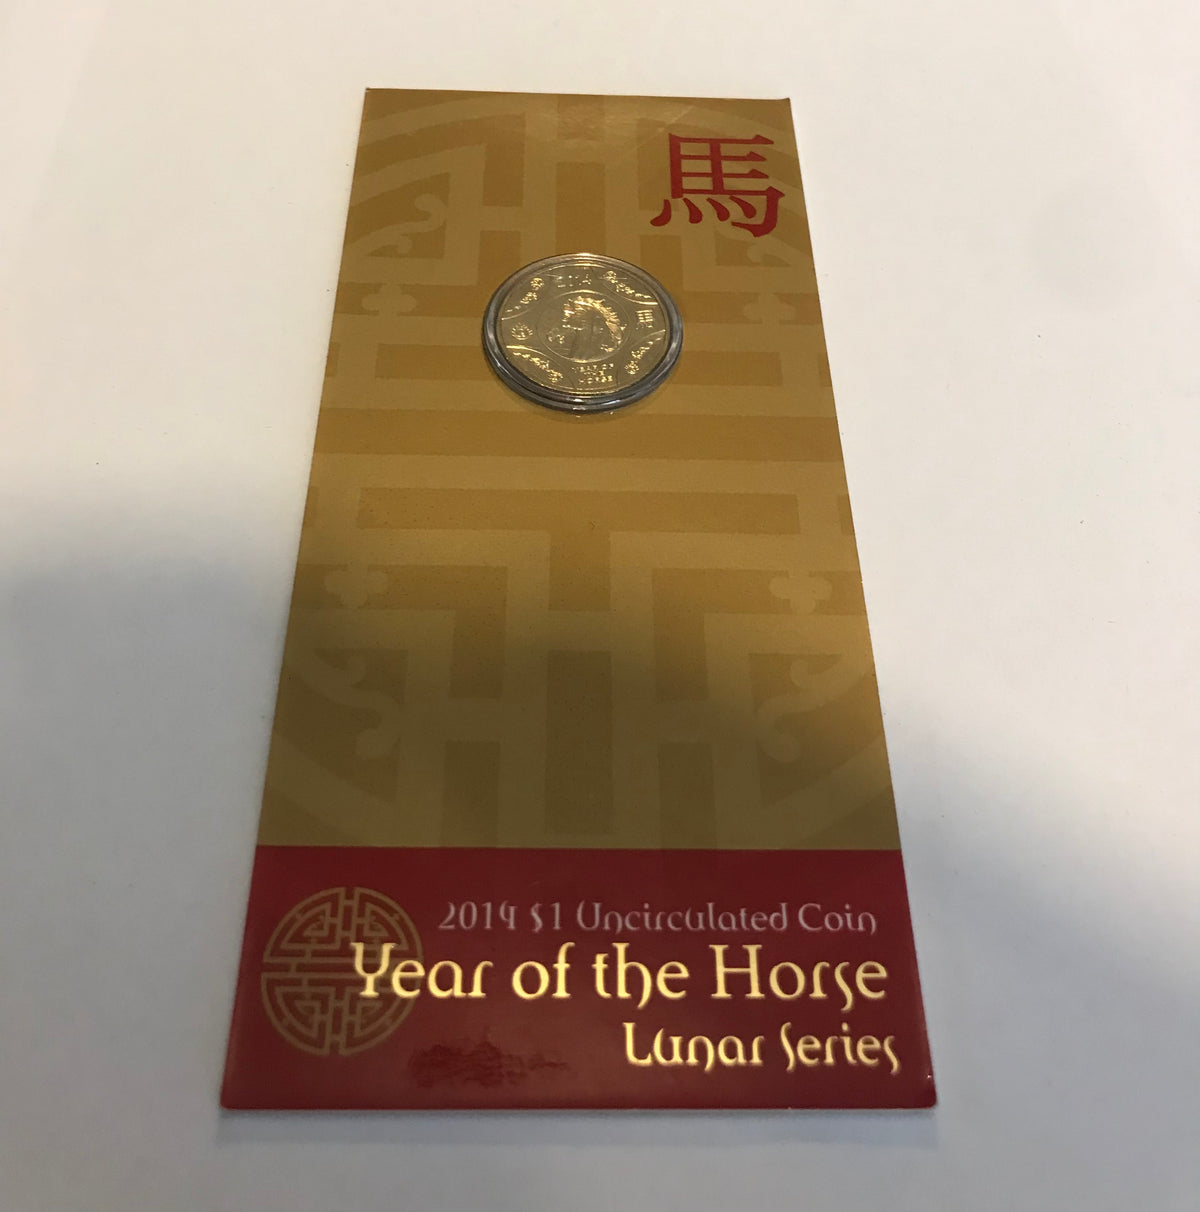 2014 $1 Uncirculated Coin. Year of the Horse